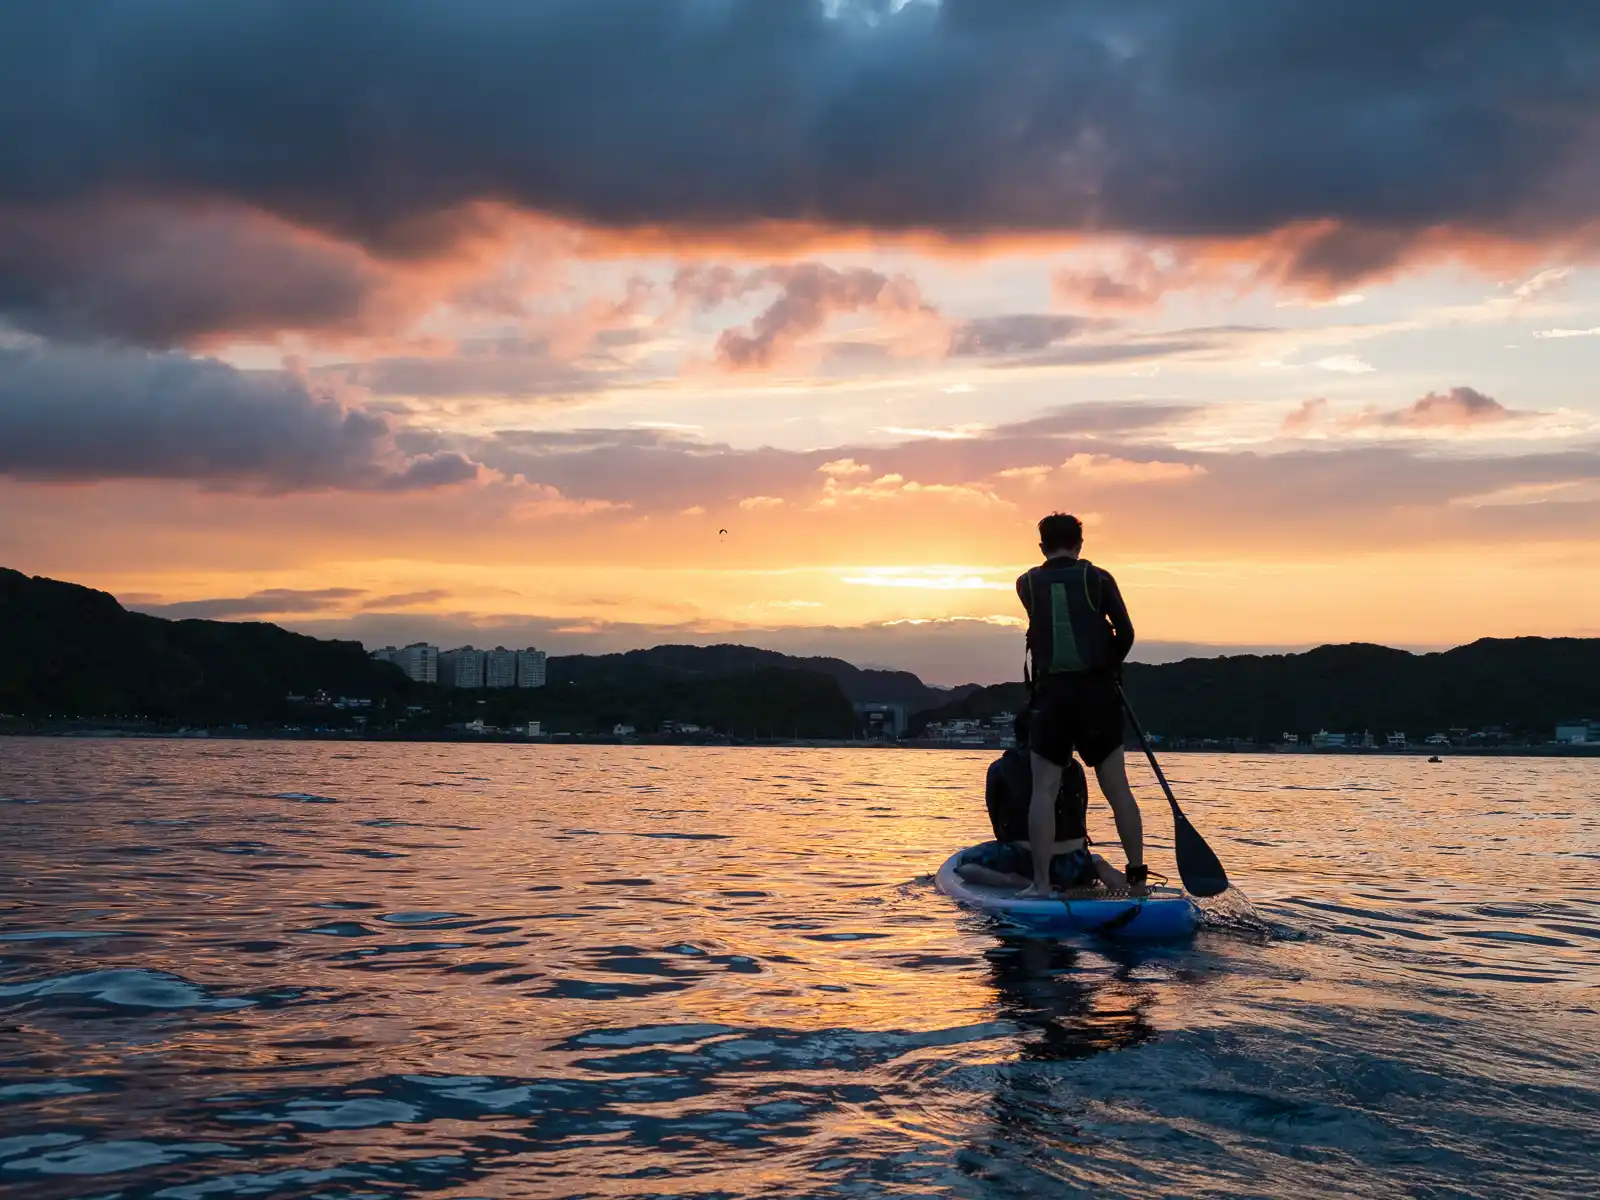 Stand-up paddleboarders paddle back to the shore after sunset.